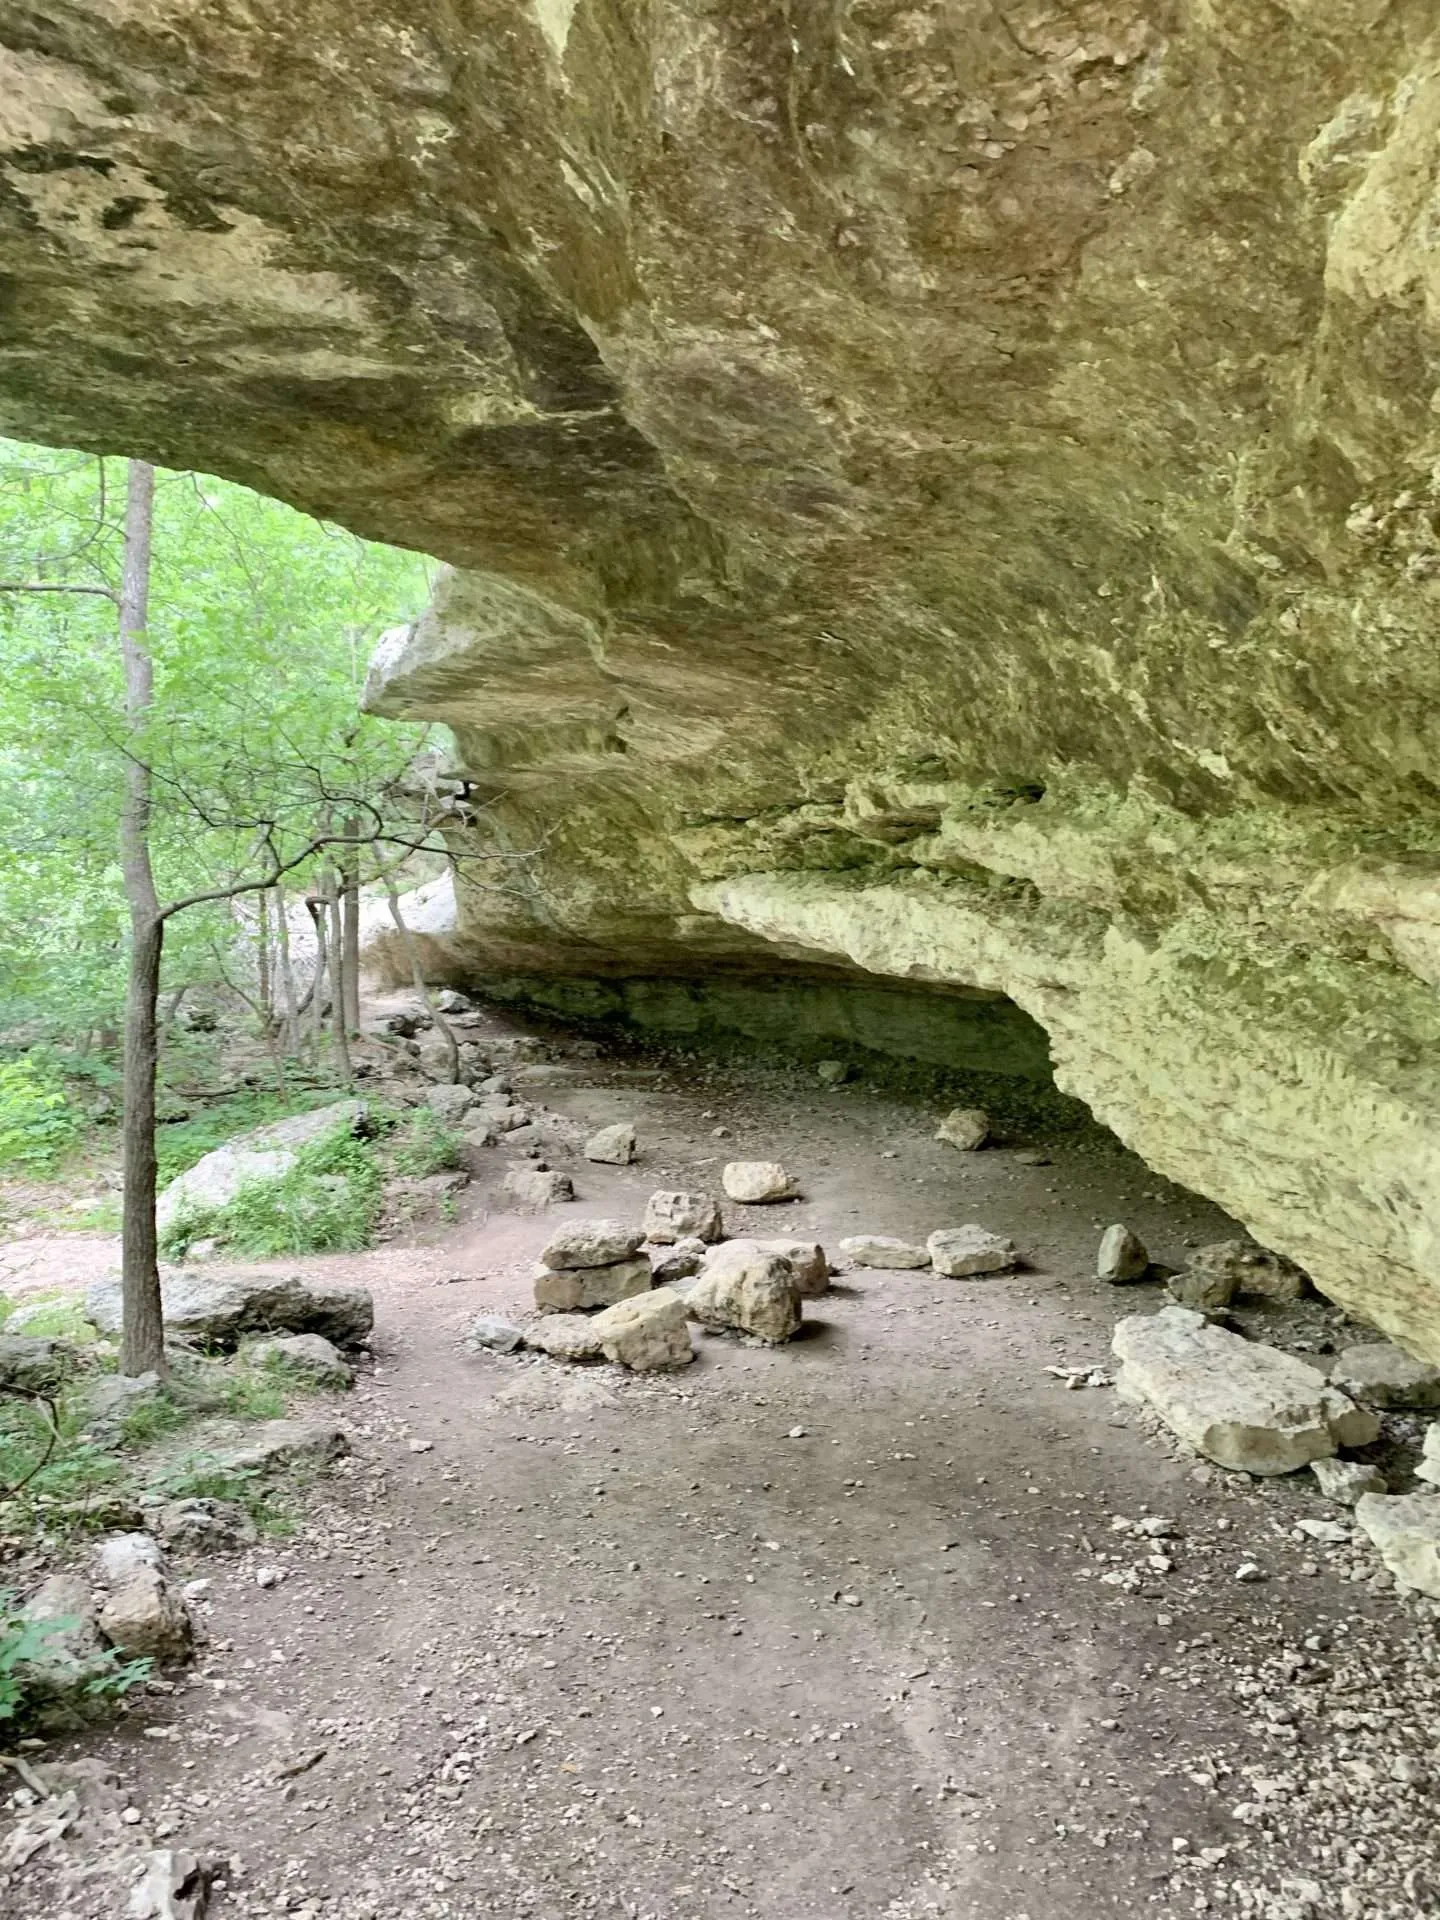 View of the cave at Mother Neff State Park near Waco, TX.